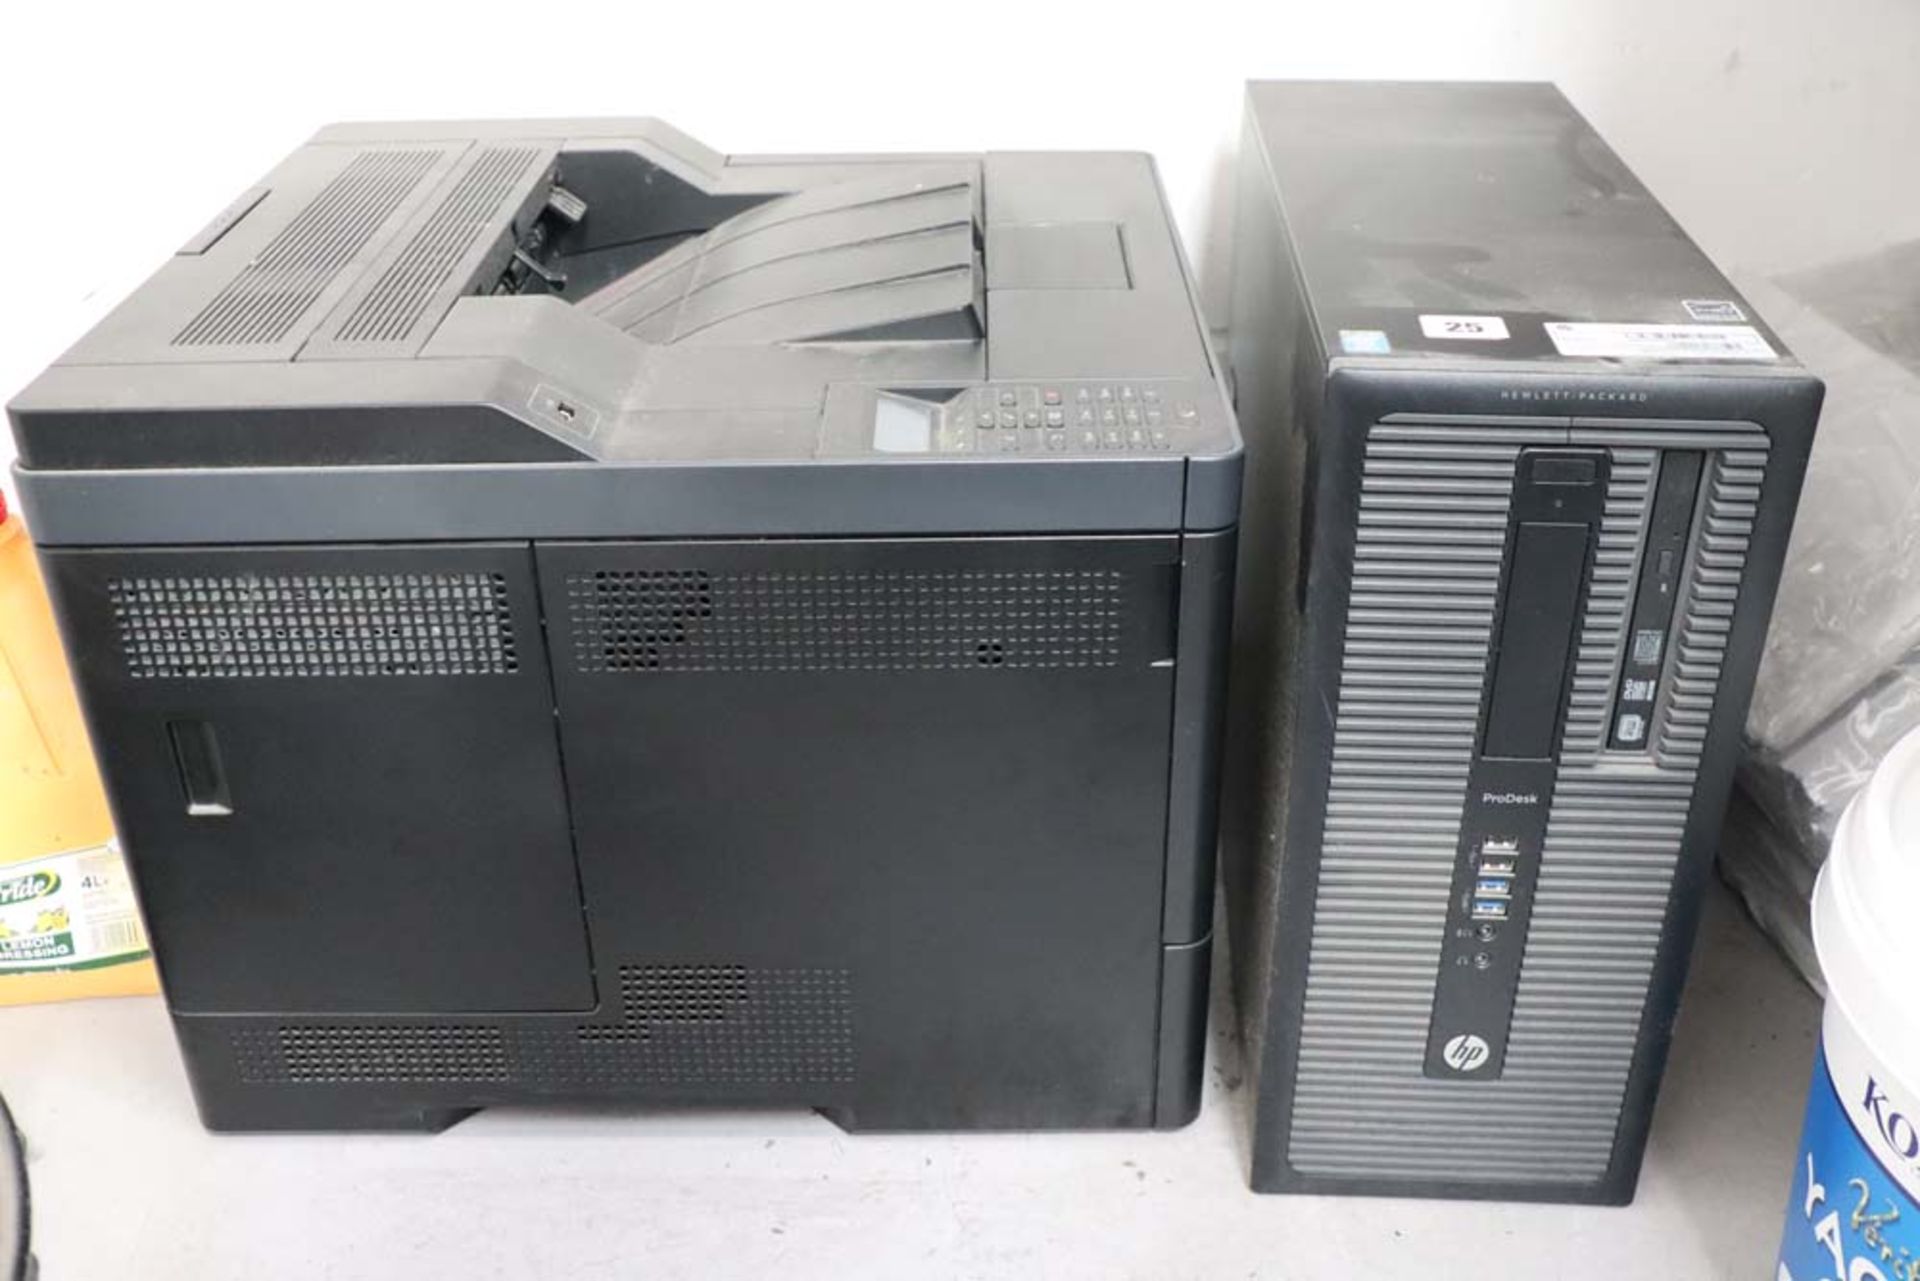 HP Pro Desk computer tower and a Dell LaserJet printer, both suitable for parts only